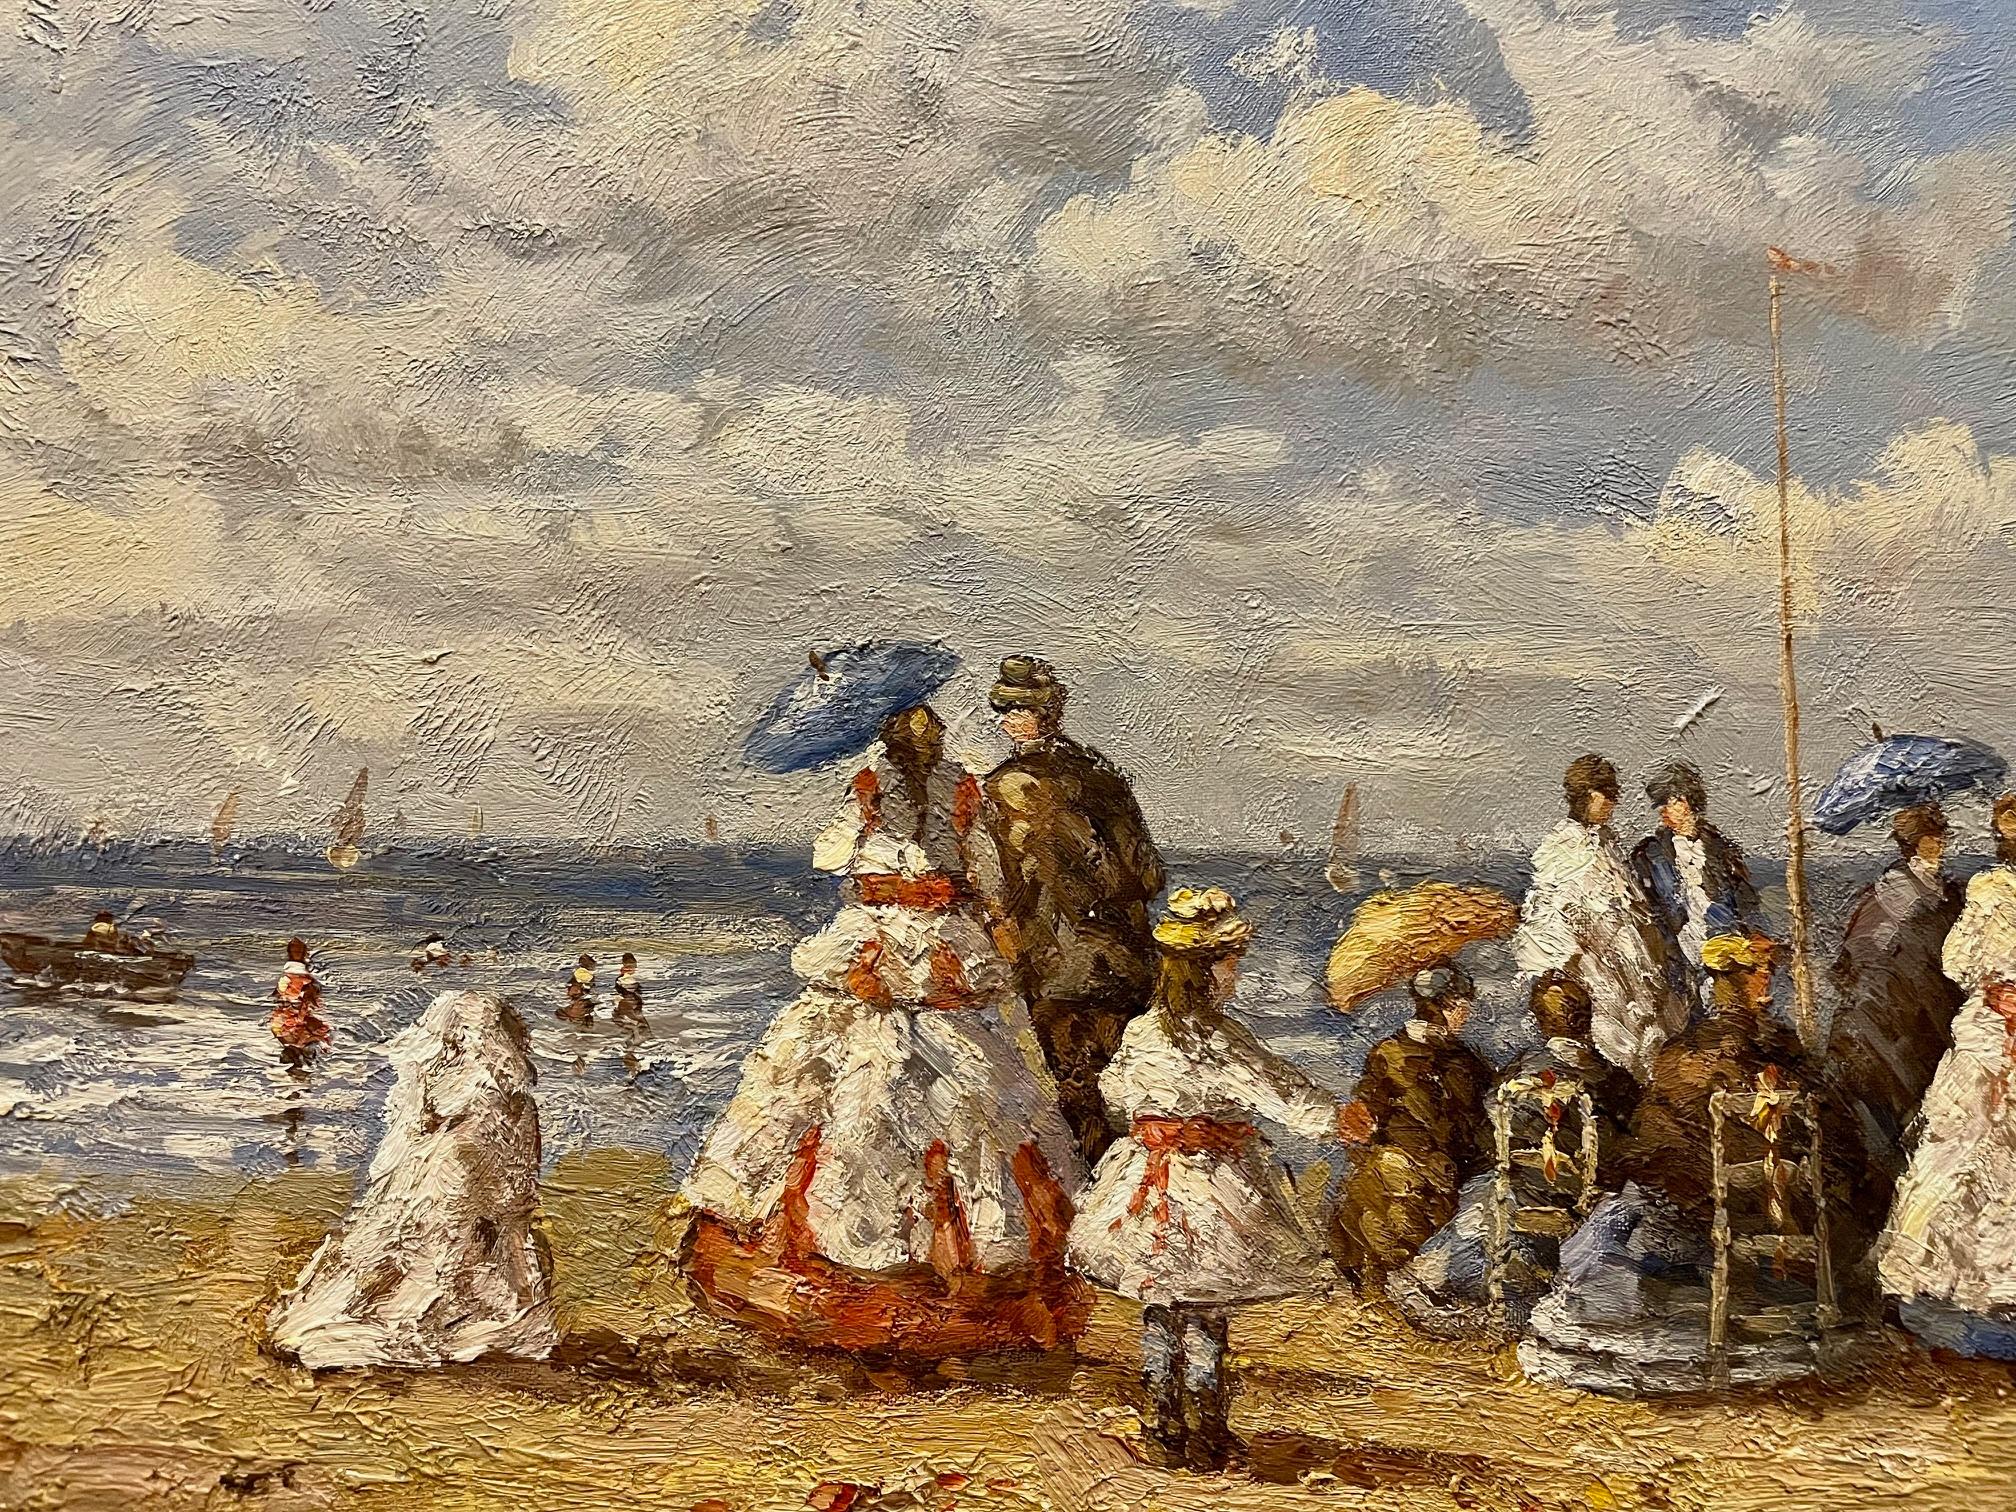 Richly-colored and vibrant Edwardian Beach Scene, British oil painting on canvas in impressionist style, presented in contemporary gold frame. The oil paint is raised and textured, lifting the beach sands, sea, sky and dresses from the canvas.